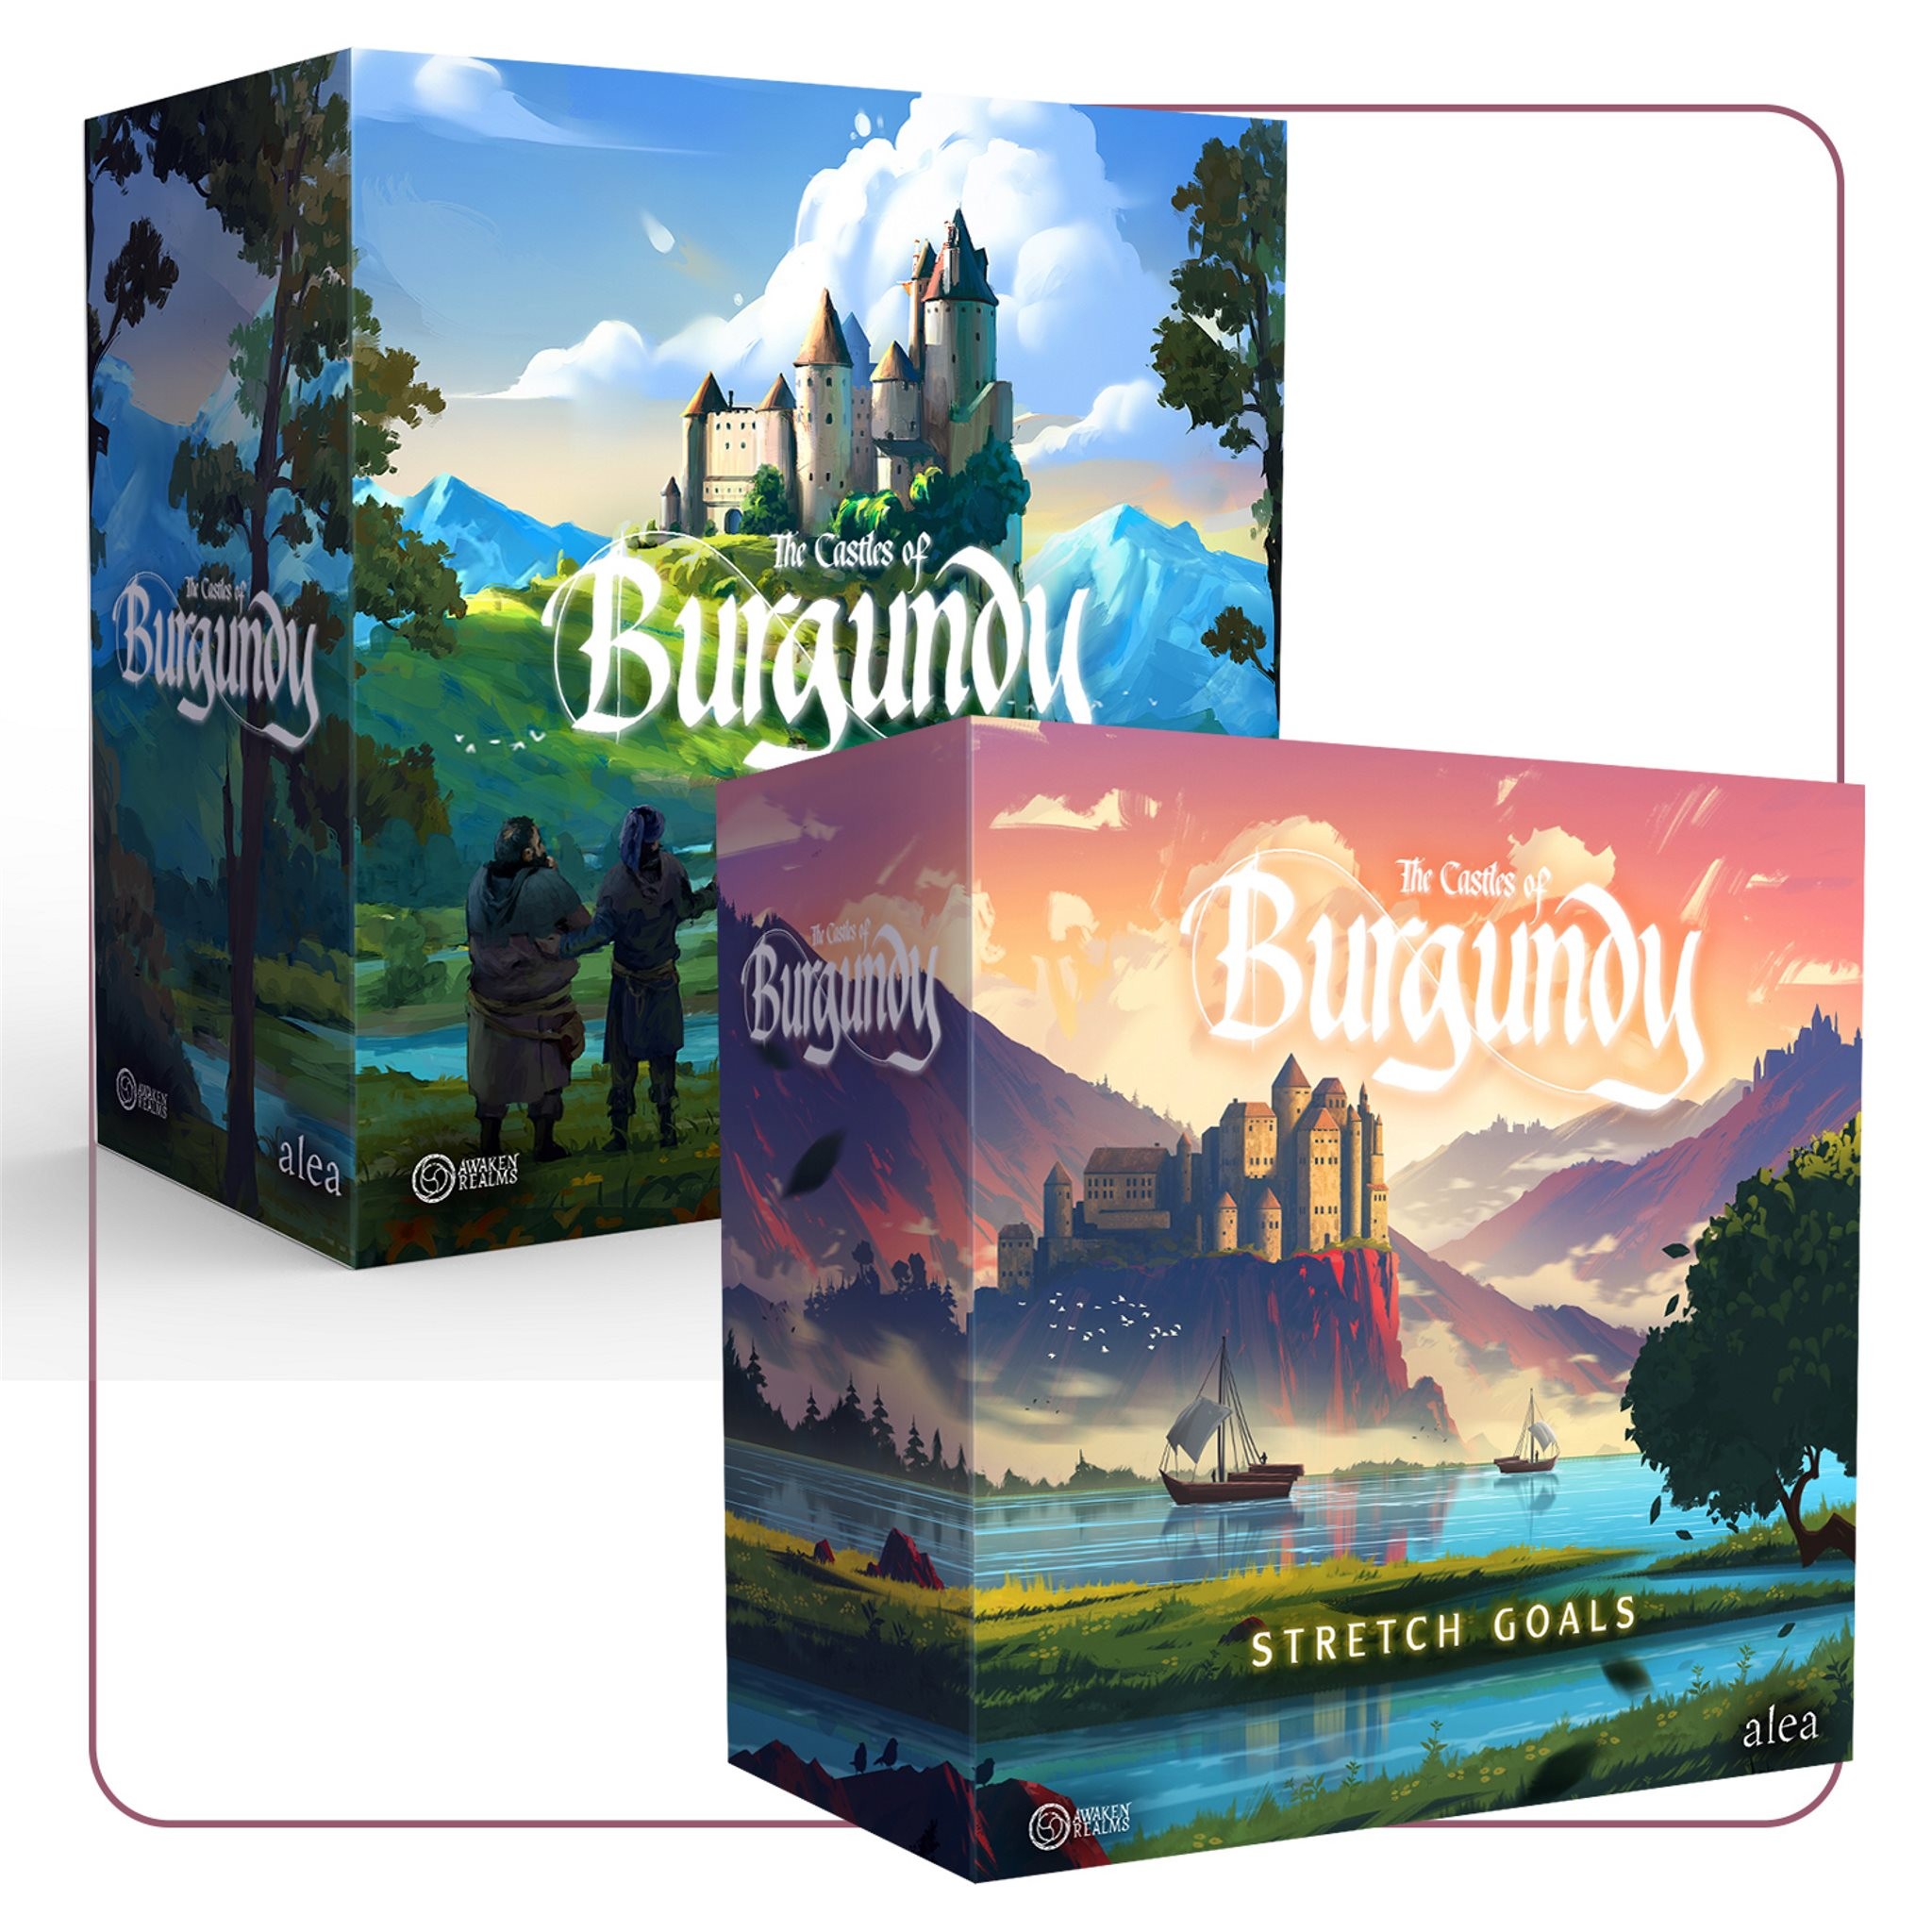 The Castles of Burgundy: Classic Edition